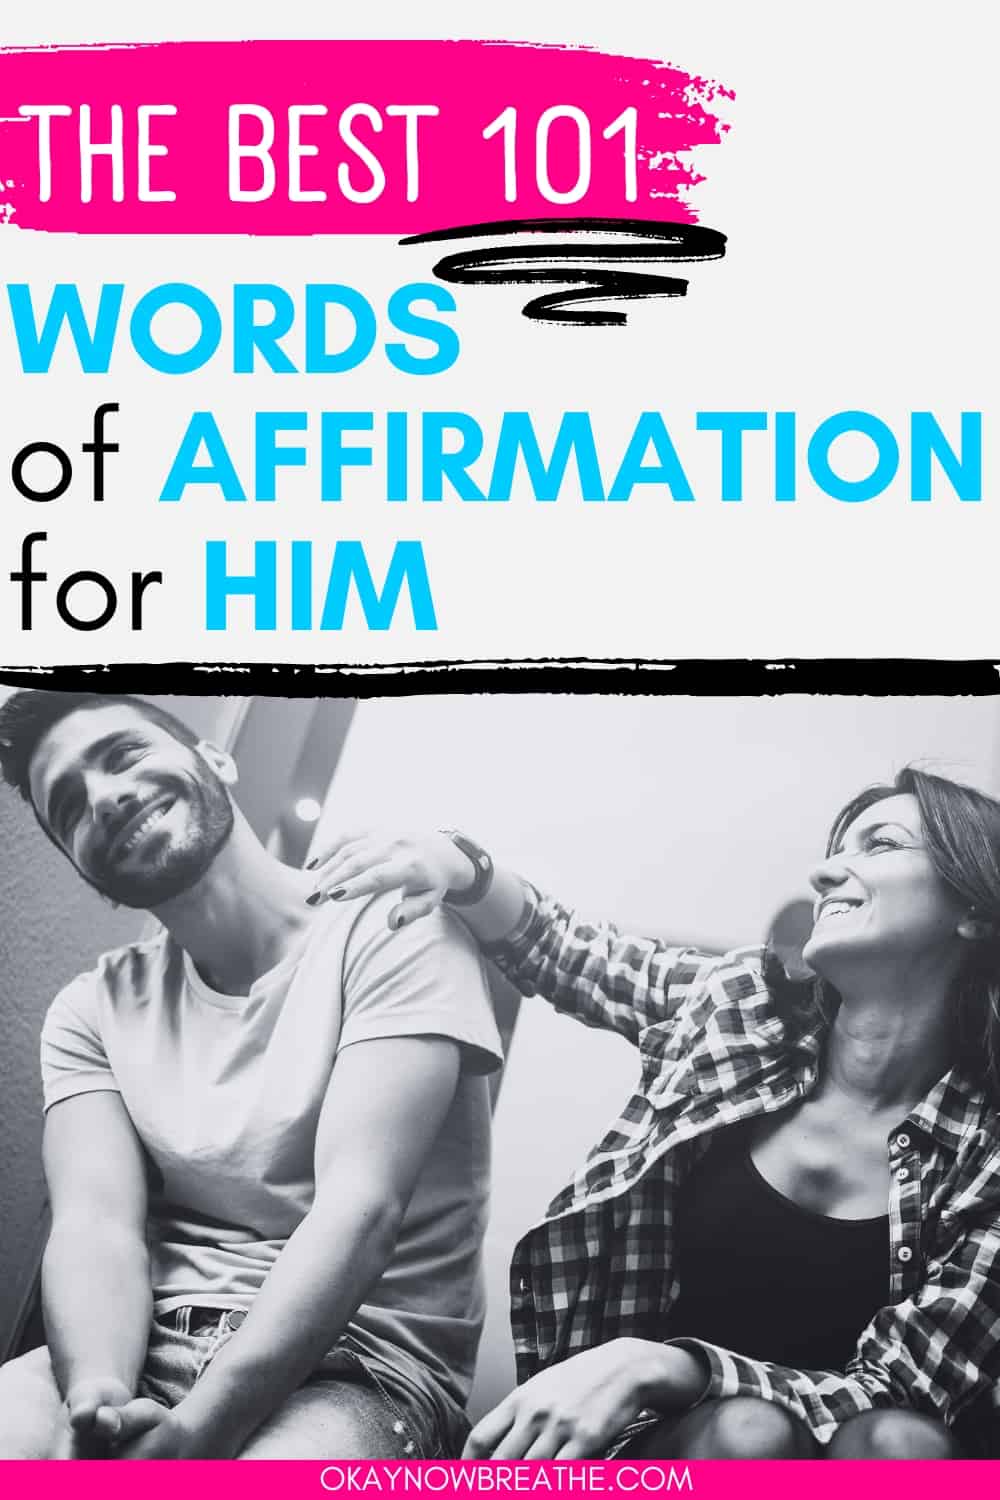 There is a black and white photo of a couple smiling. She has her hand on his shoulder. Above, there is text: "the best 101 words of affirmation for him"